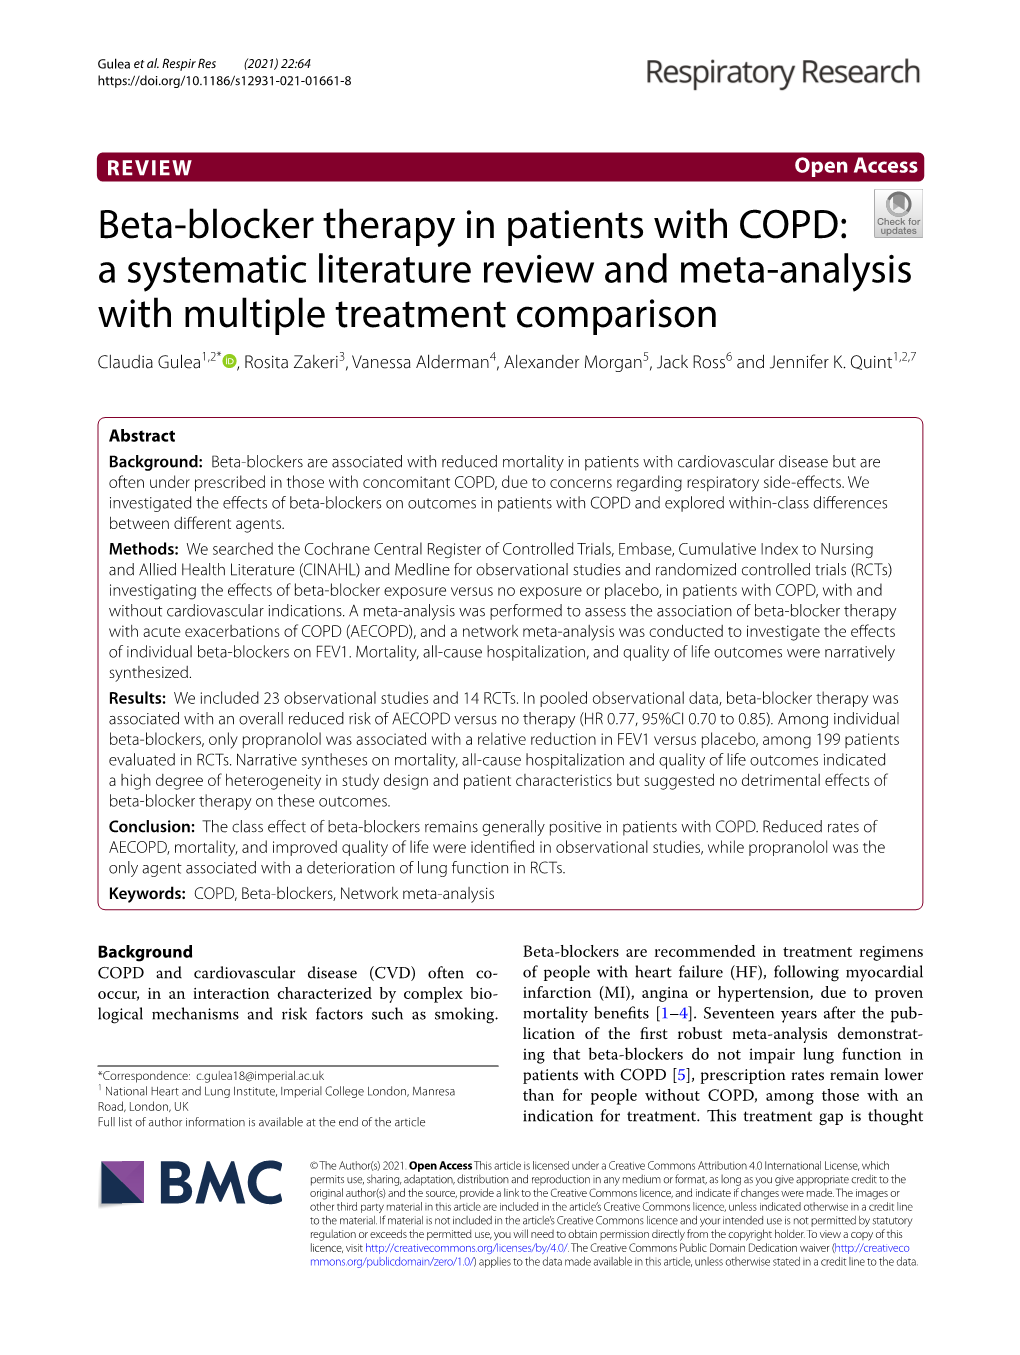 Beta-Blocker Therapy in Patients with COPD